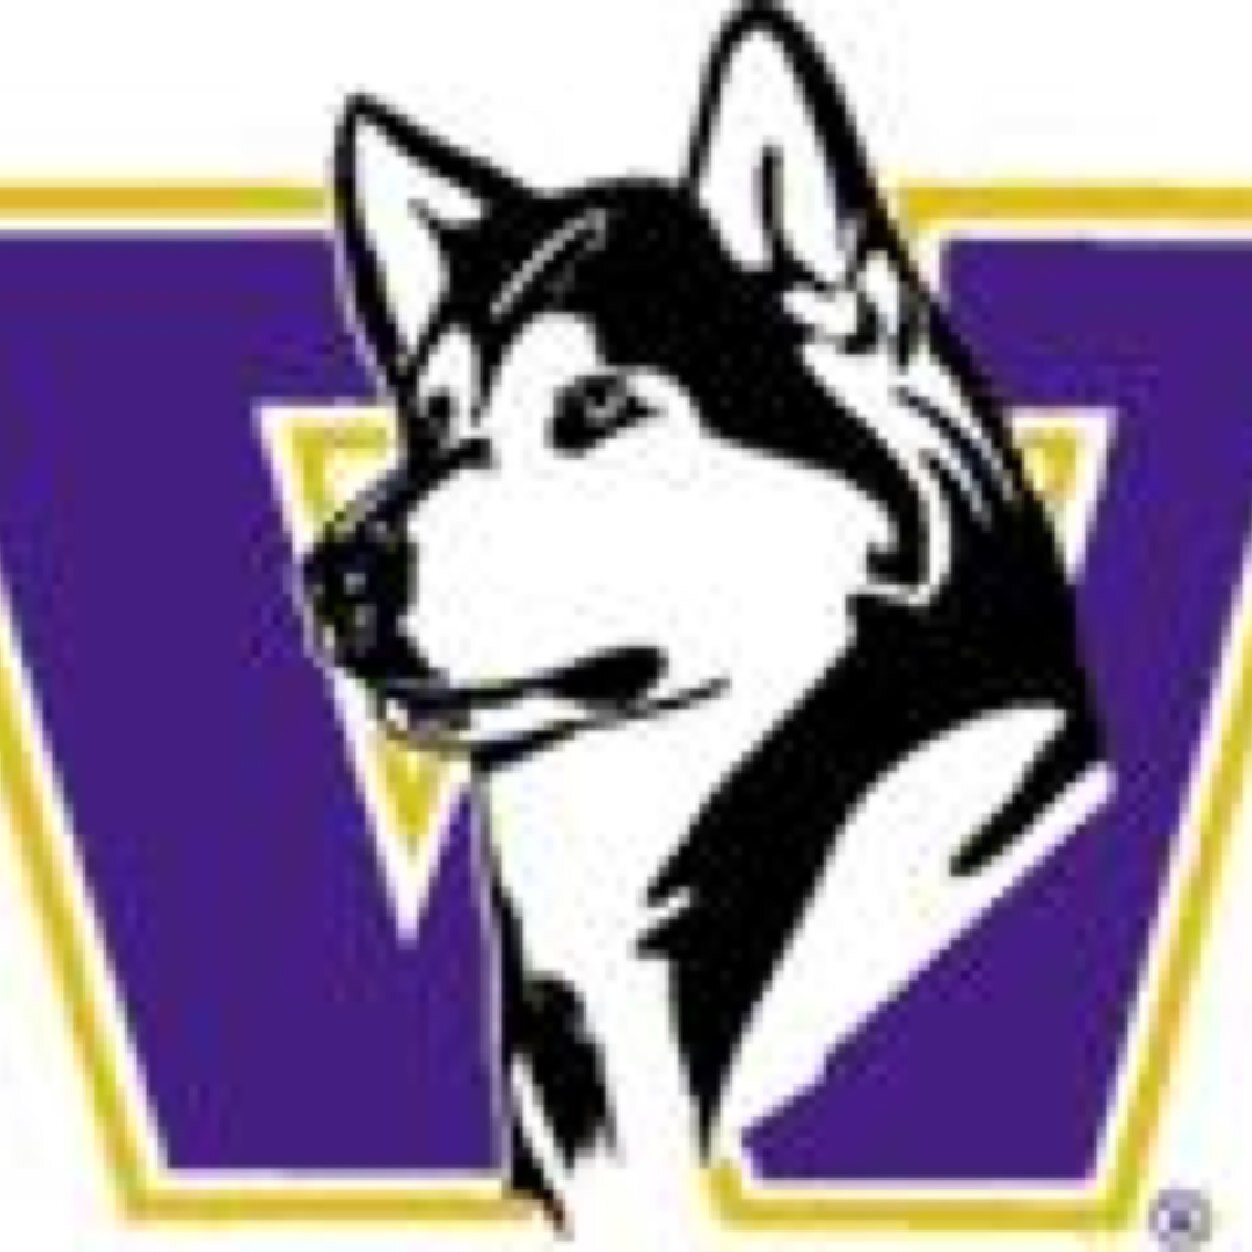 The inside scoop to The University Of Washington's football and basketball recruiting. http://t.co/s8cdmytKoS / http://t.co/AIW33UCzo4